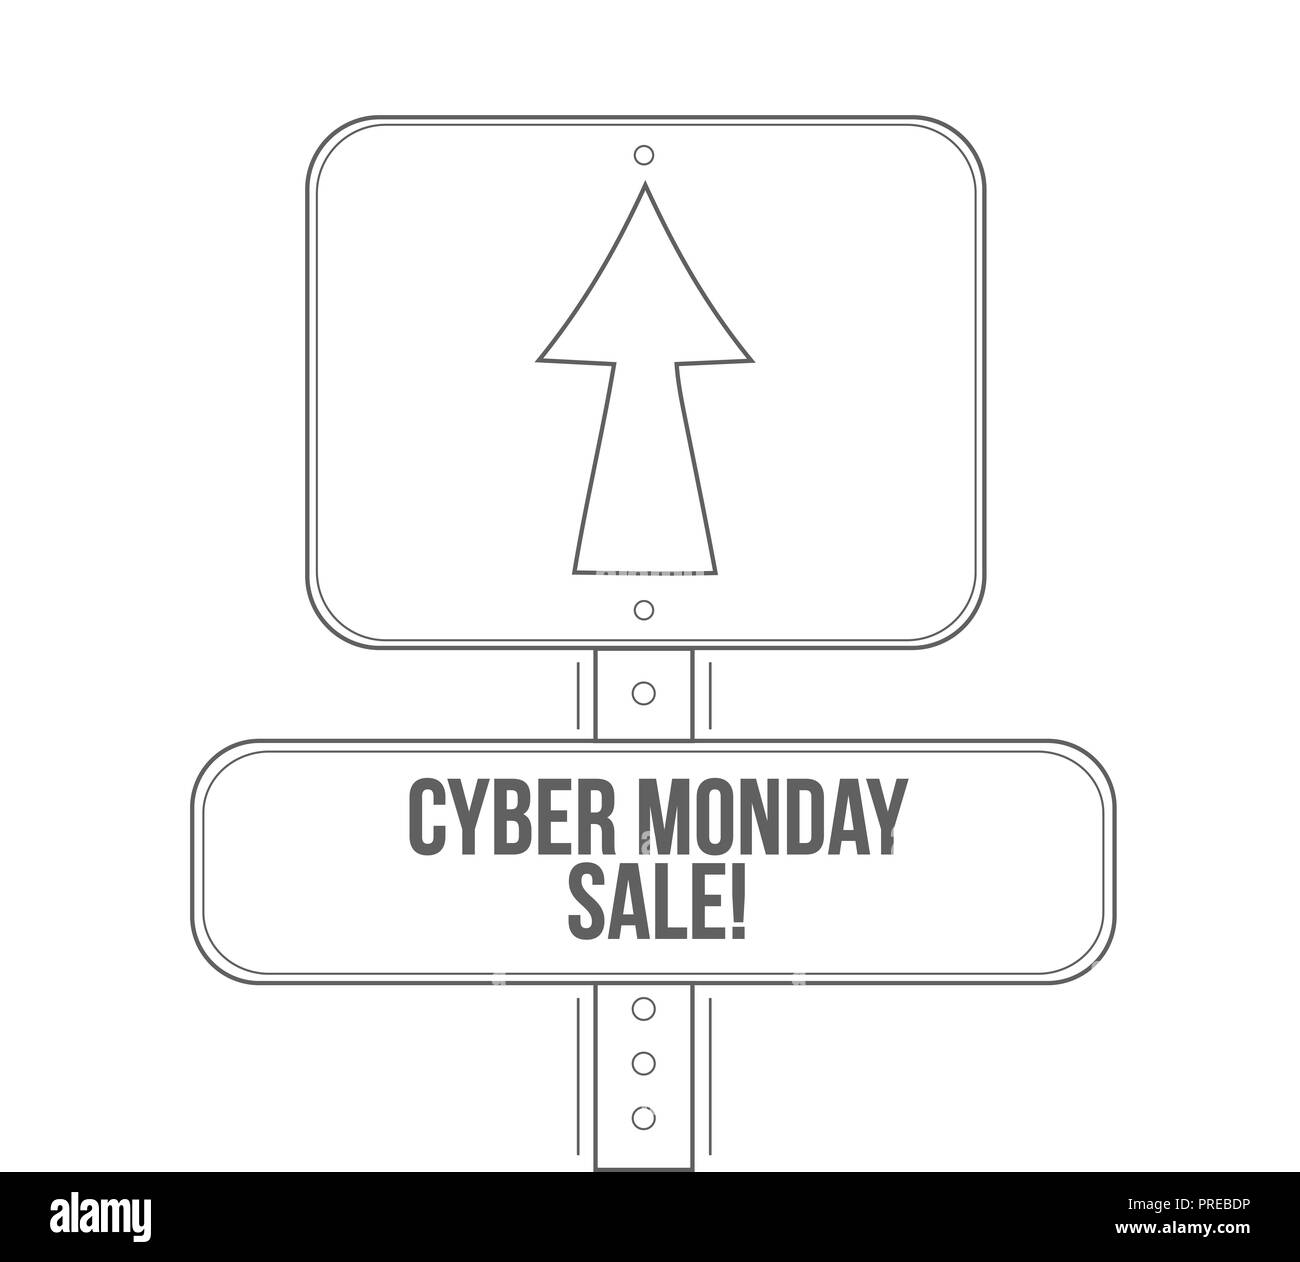 Cyber Monday Sale line street sign isolated over a white background Stock Photo